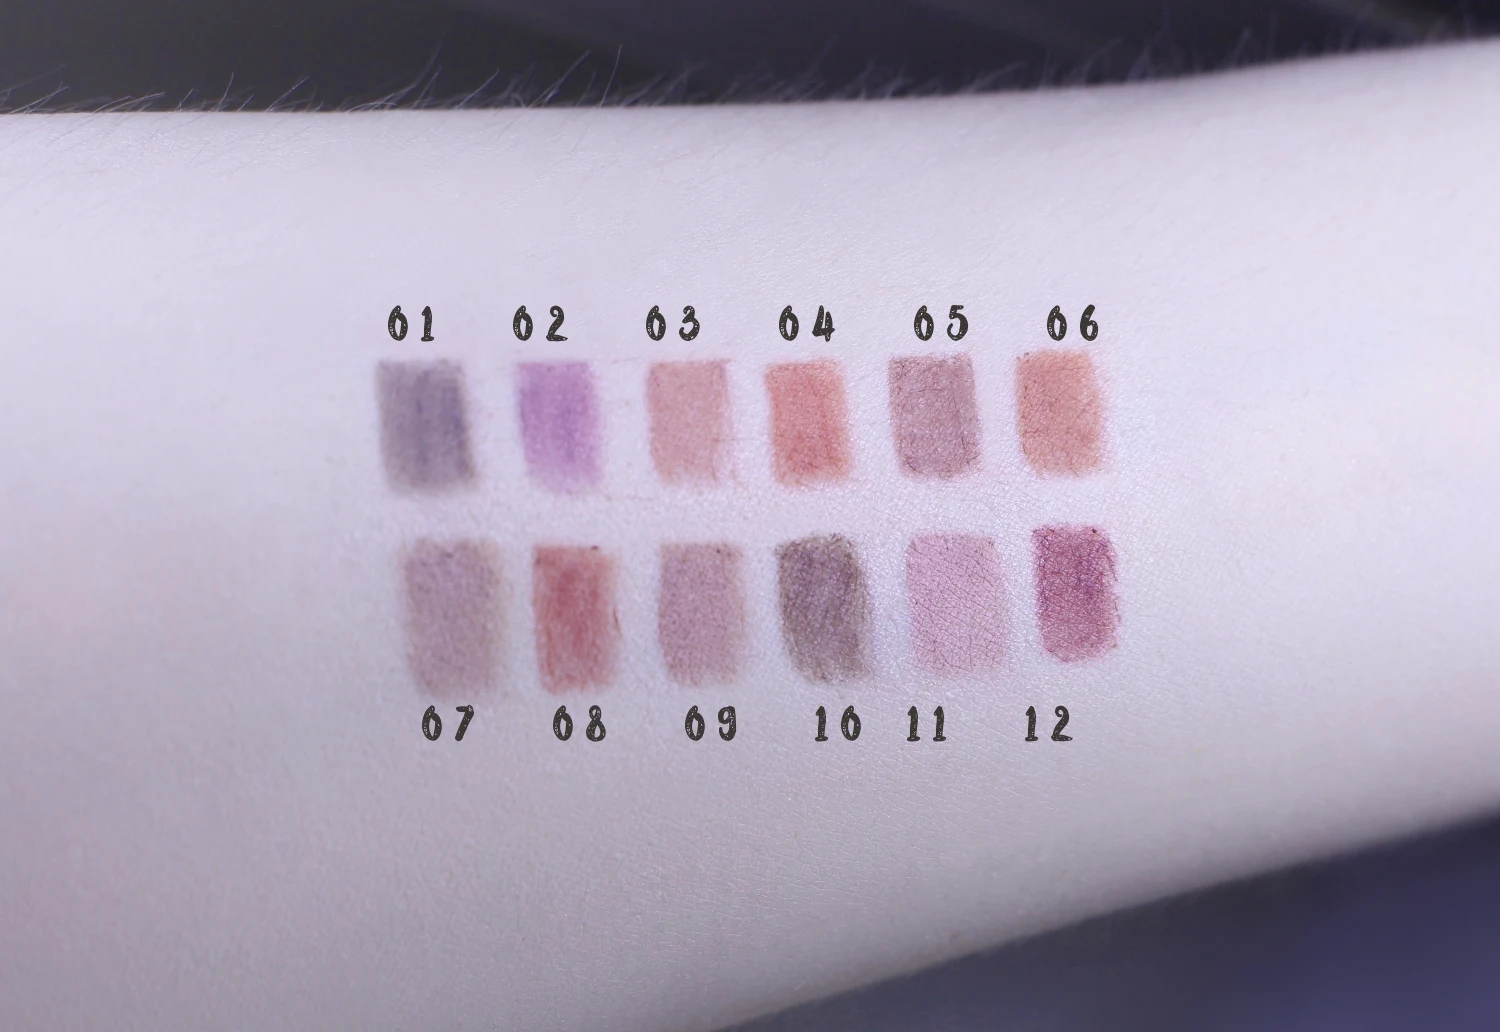 12 swatches of the nude lip pencil set on a light skin